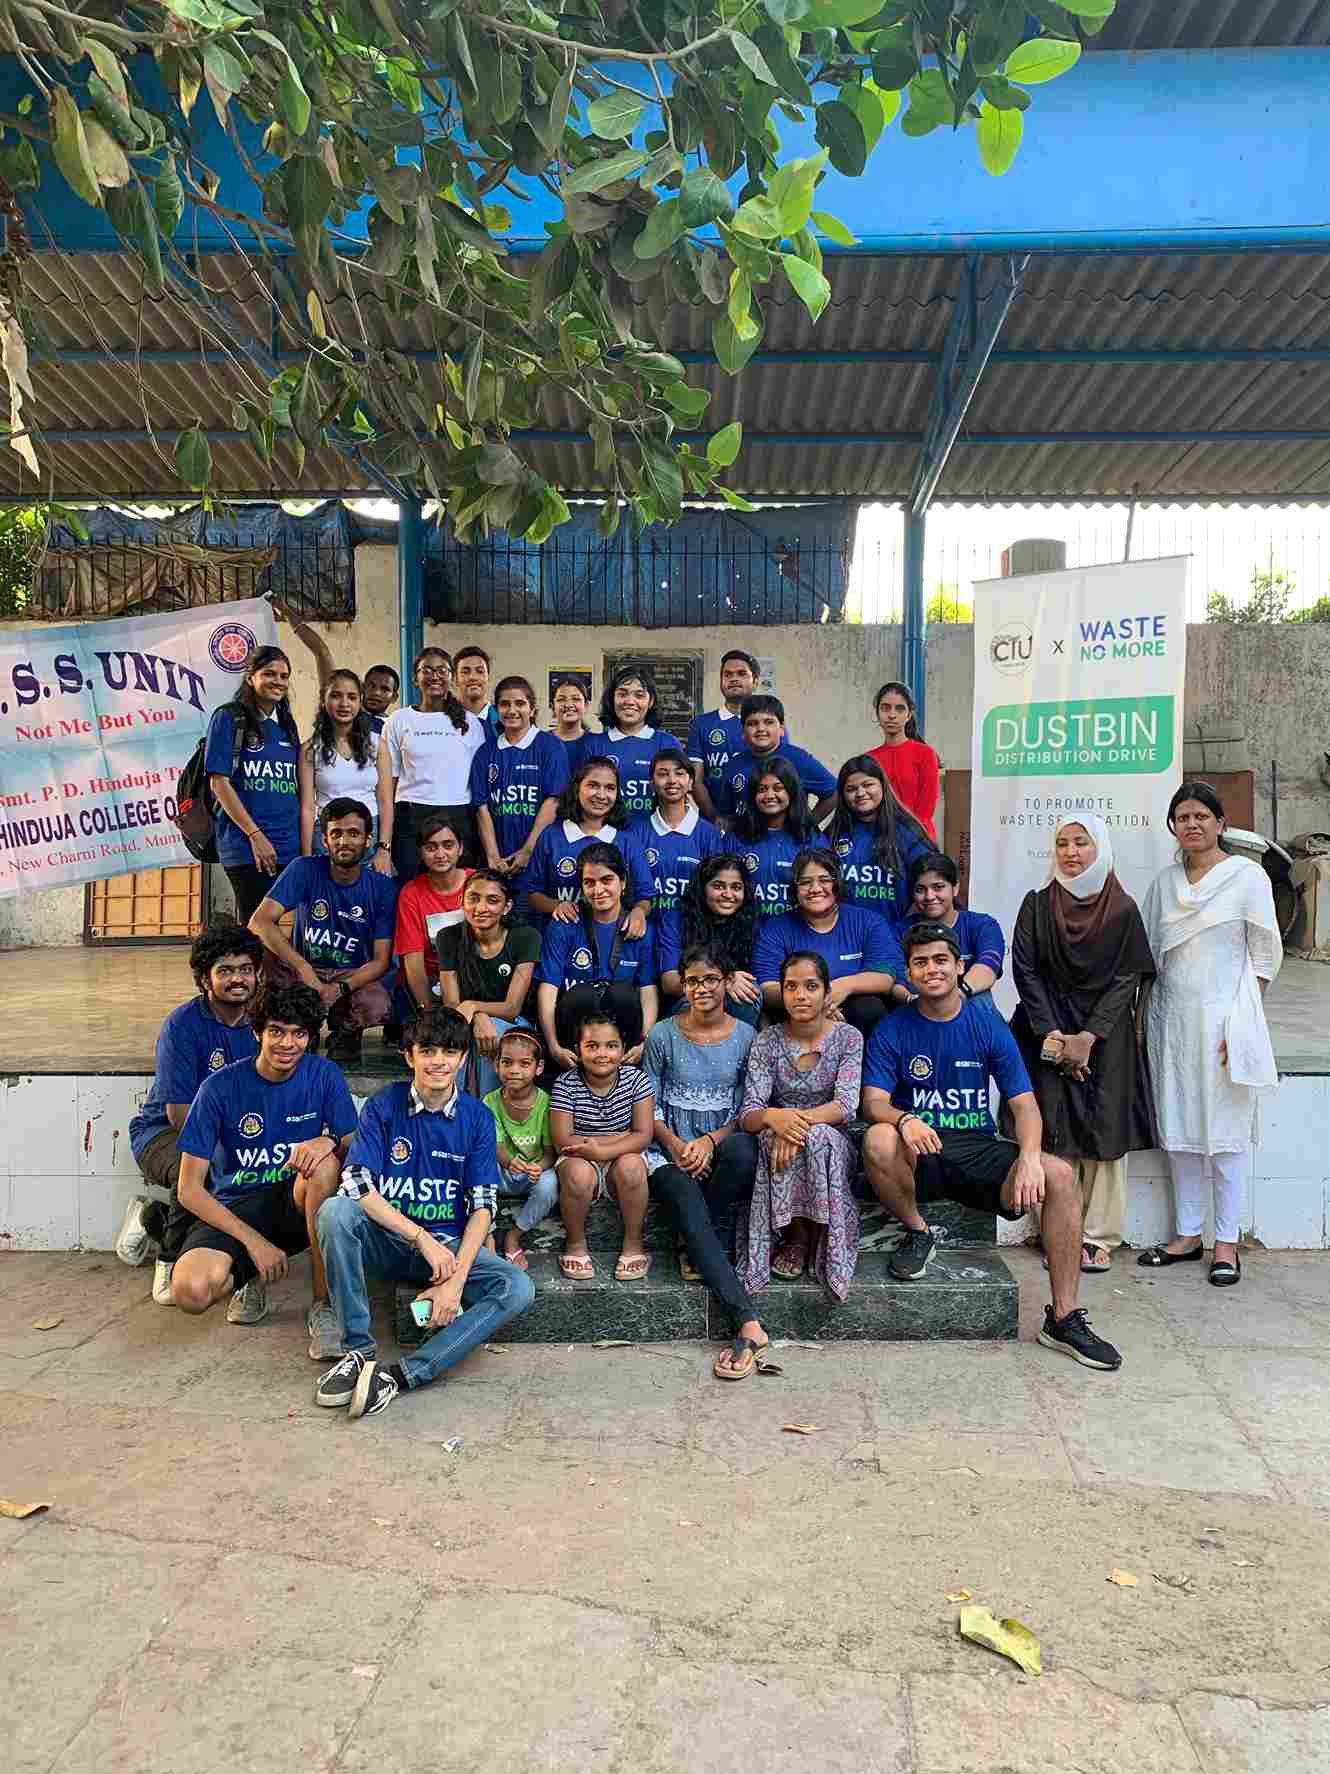 The Change Is Us team conducts beach cleanup drives, empathy drives and workshops in schools and colleges to spread the message of climate change